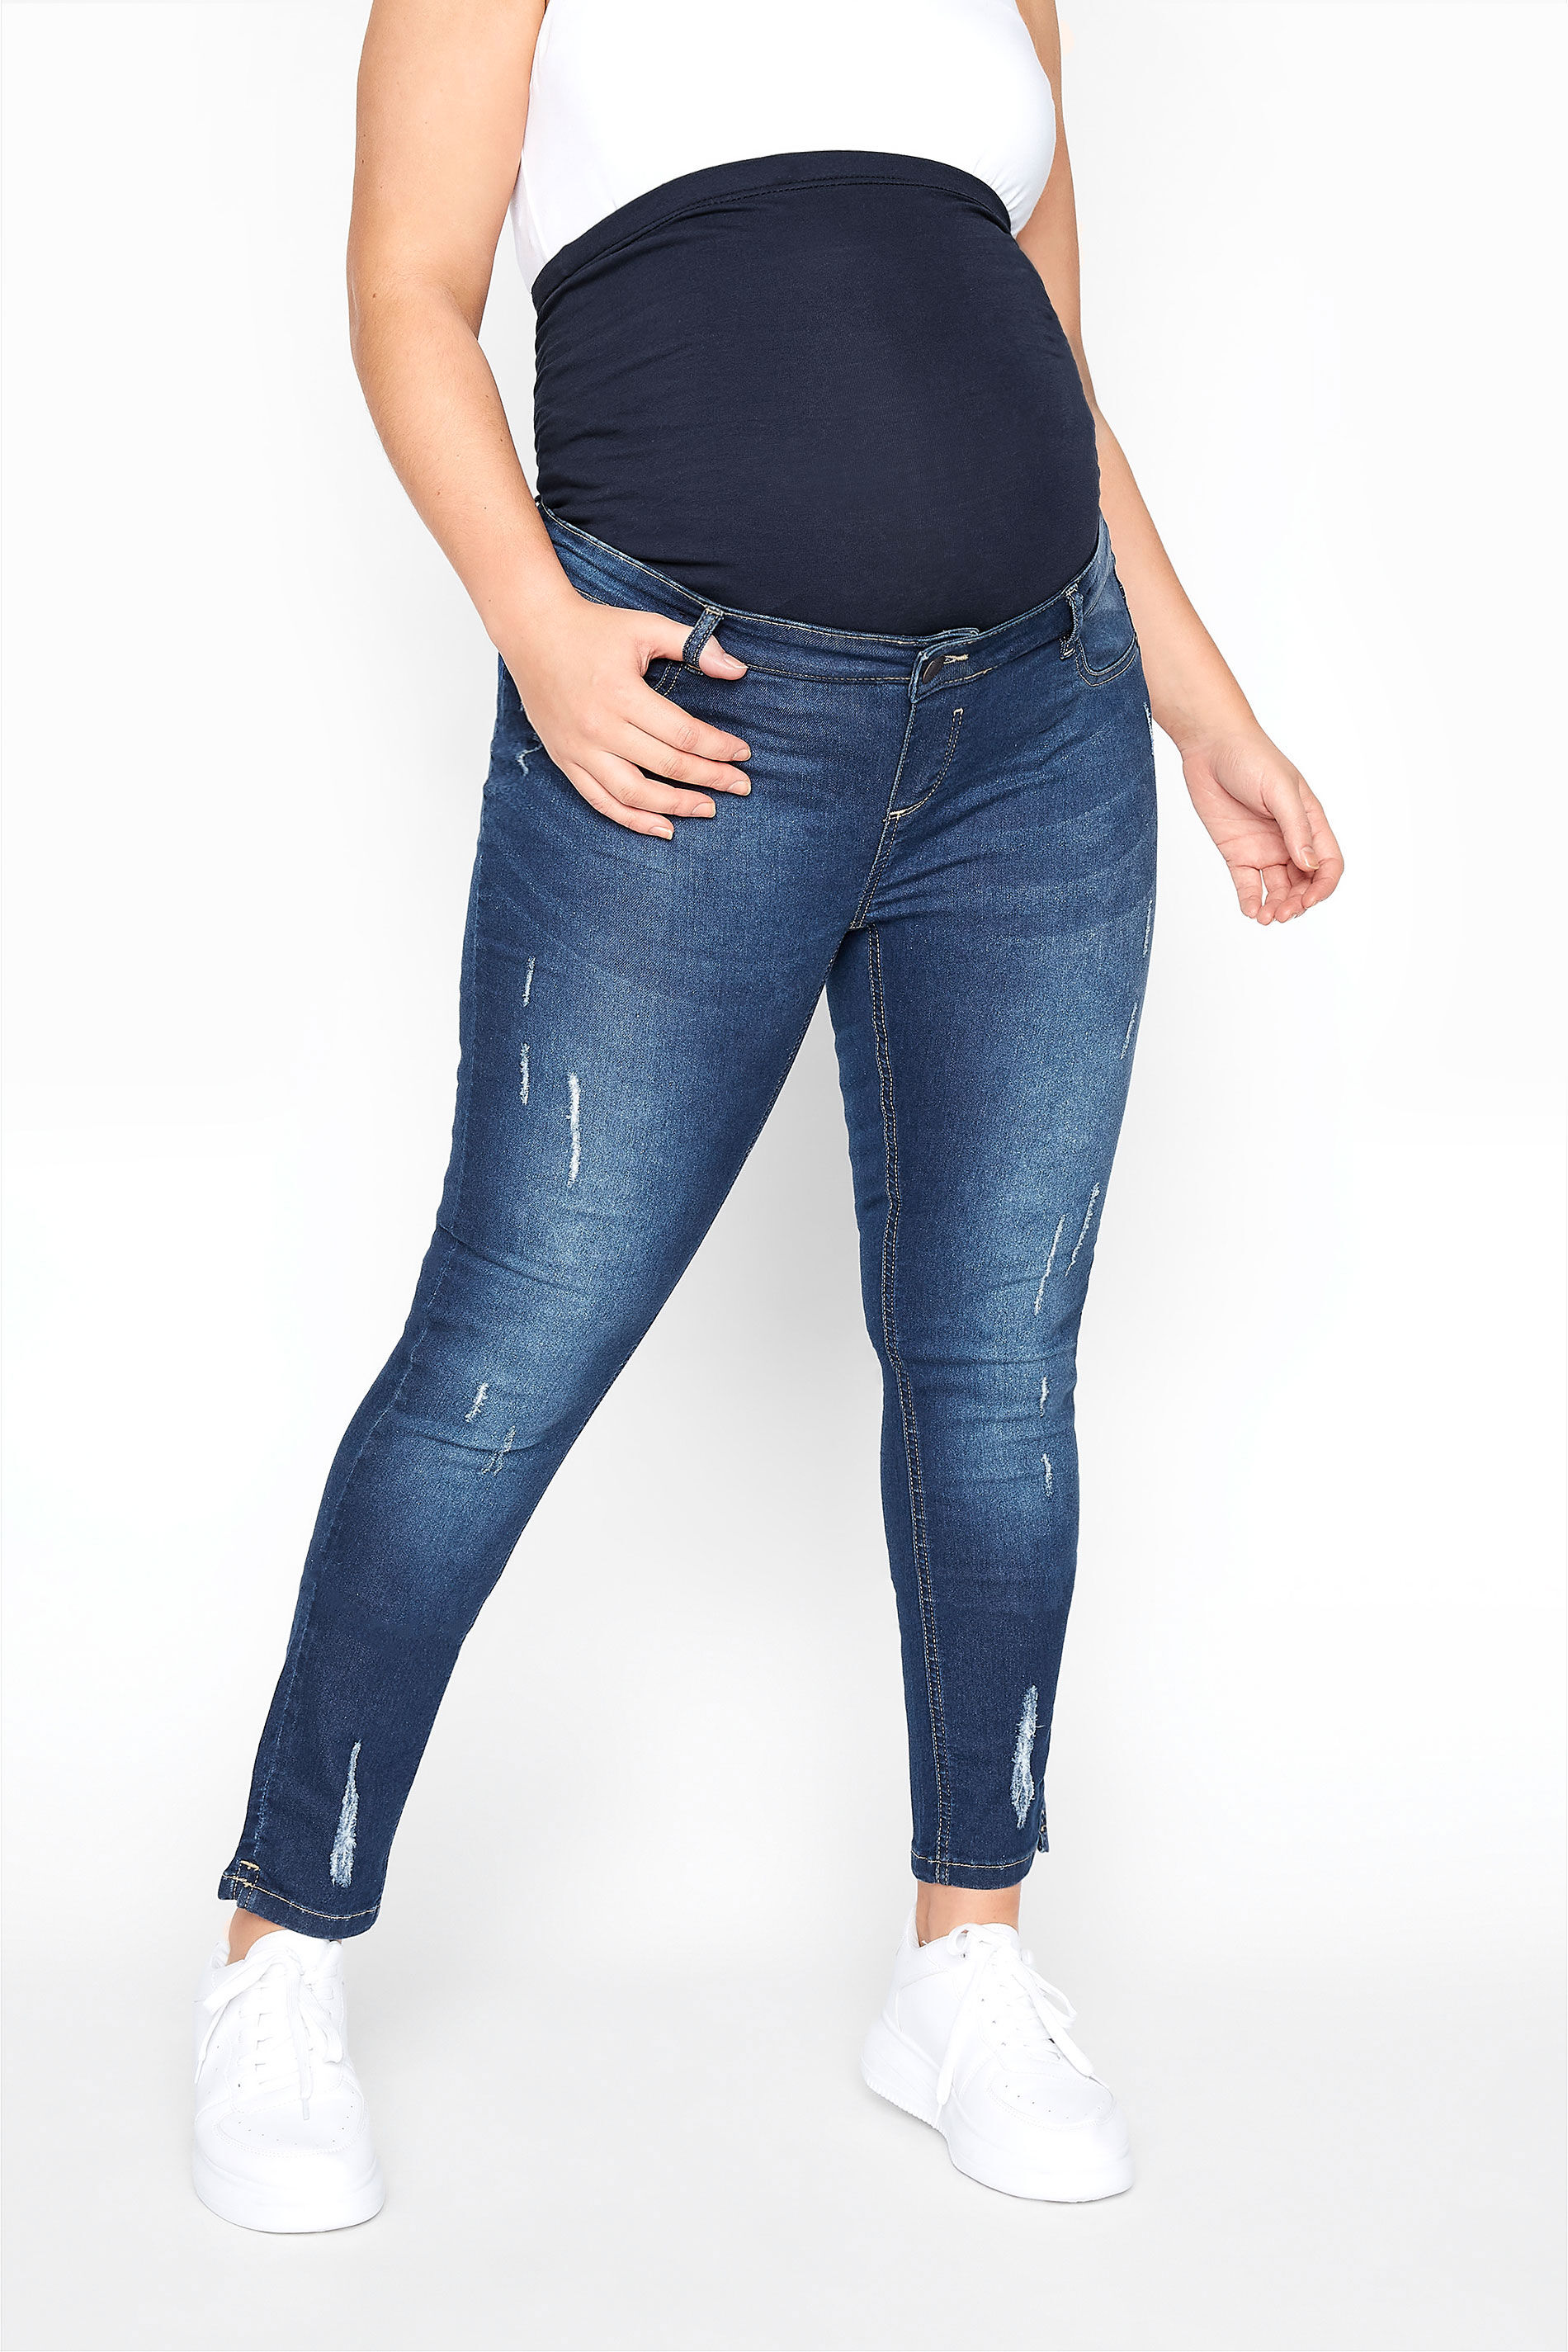 Yours Clothing Bump it up maternity blue cat scratch skinny jeans with comfort panel